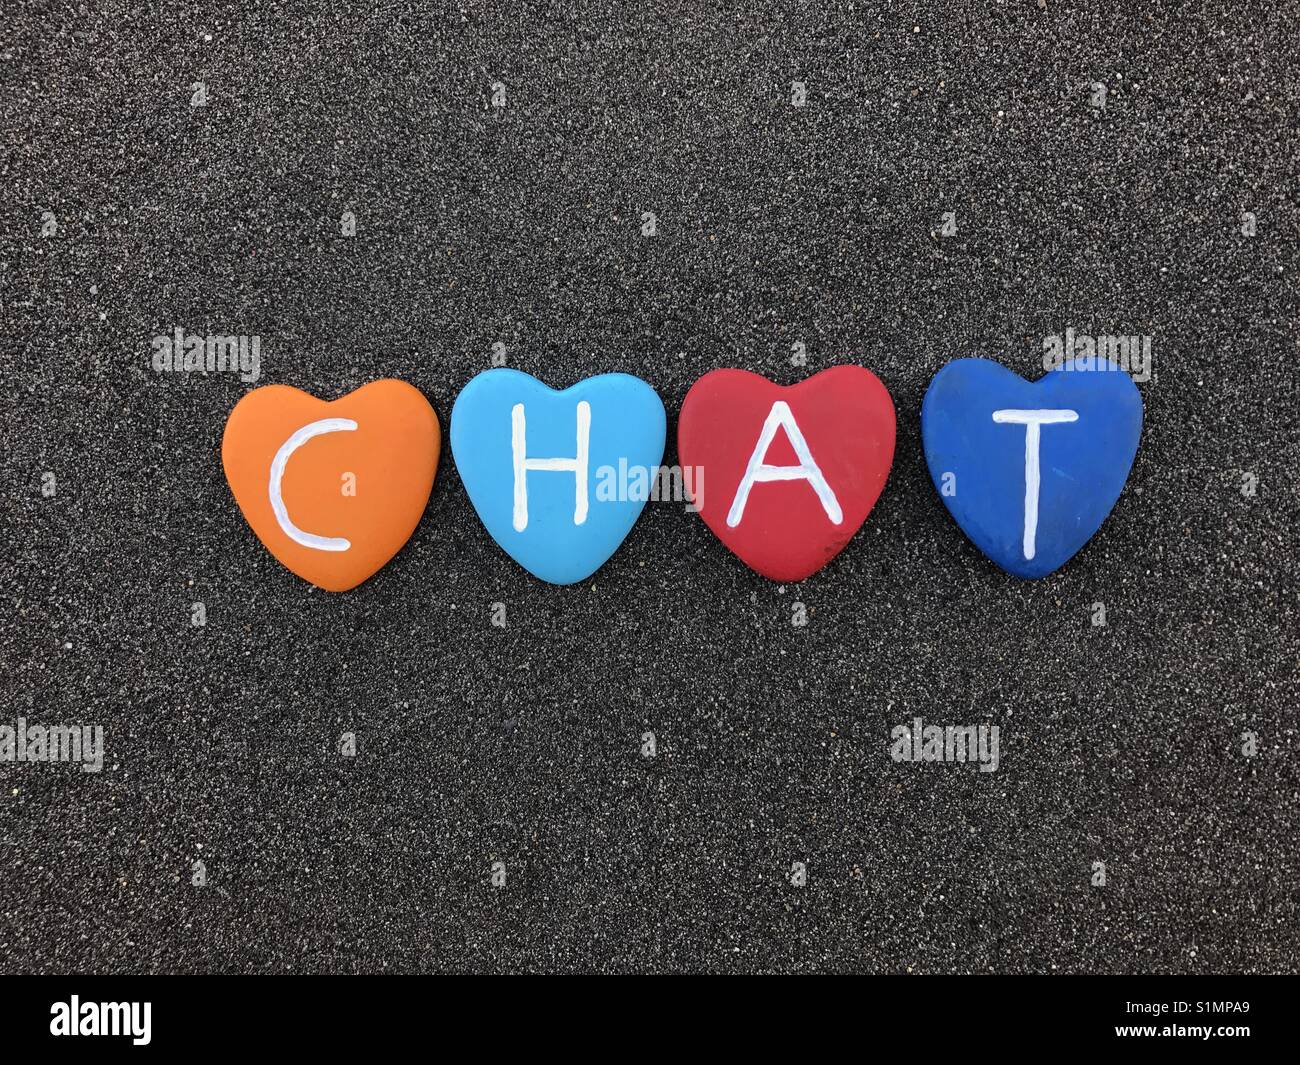 Chat word with colored heart stones over black volcanic sand Stock Photo